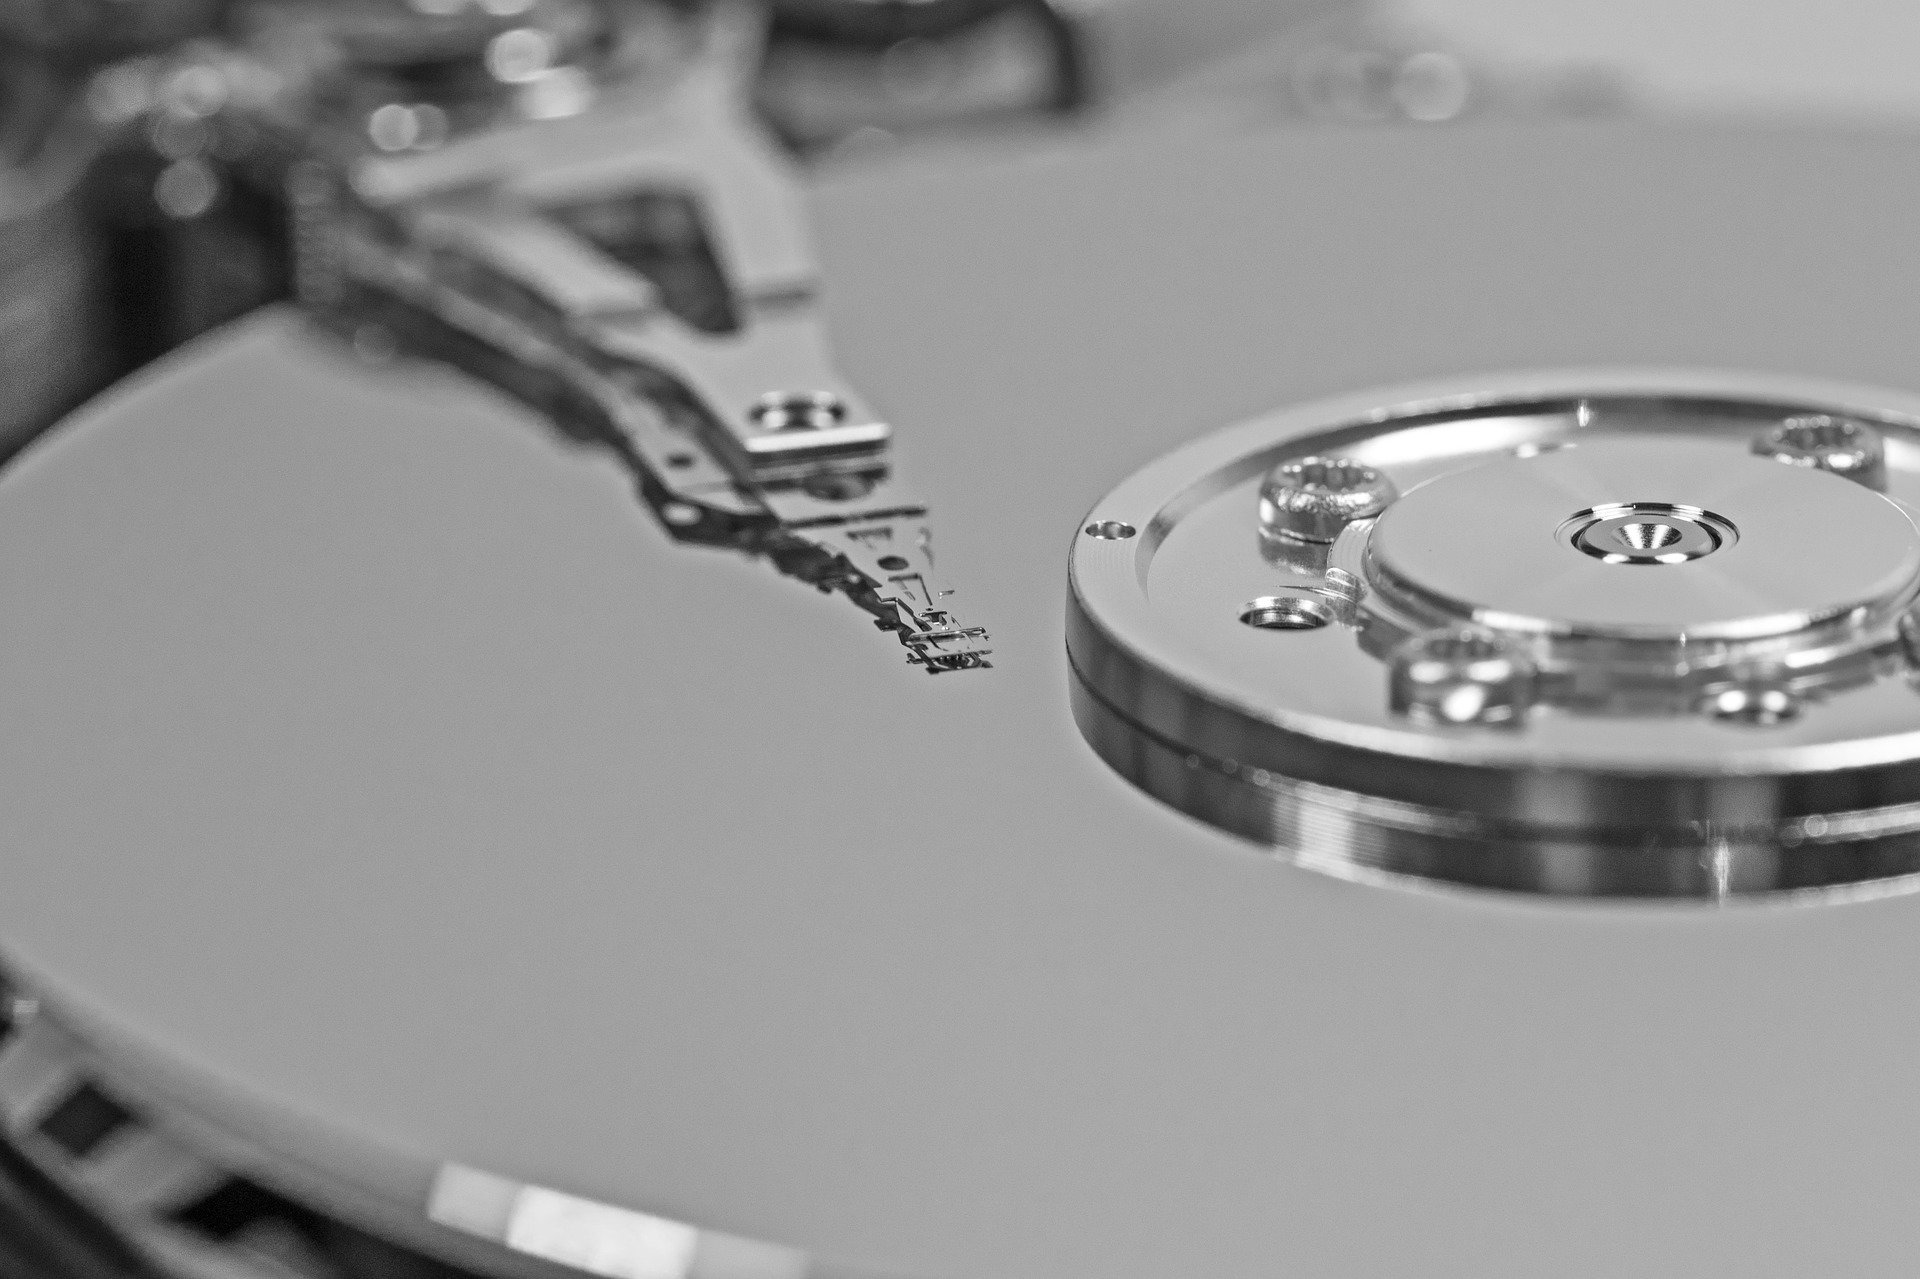 A major step closer to a viable recording material for future hard disk drives